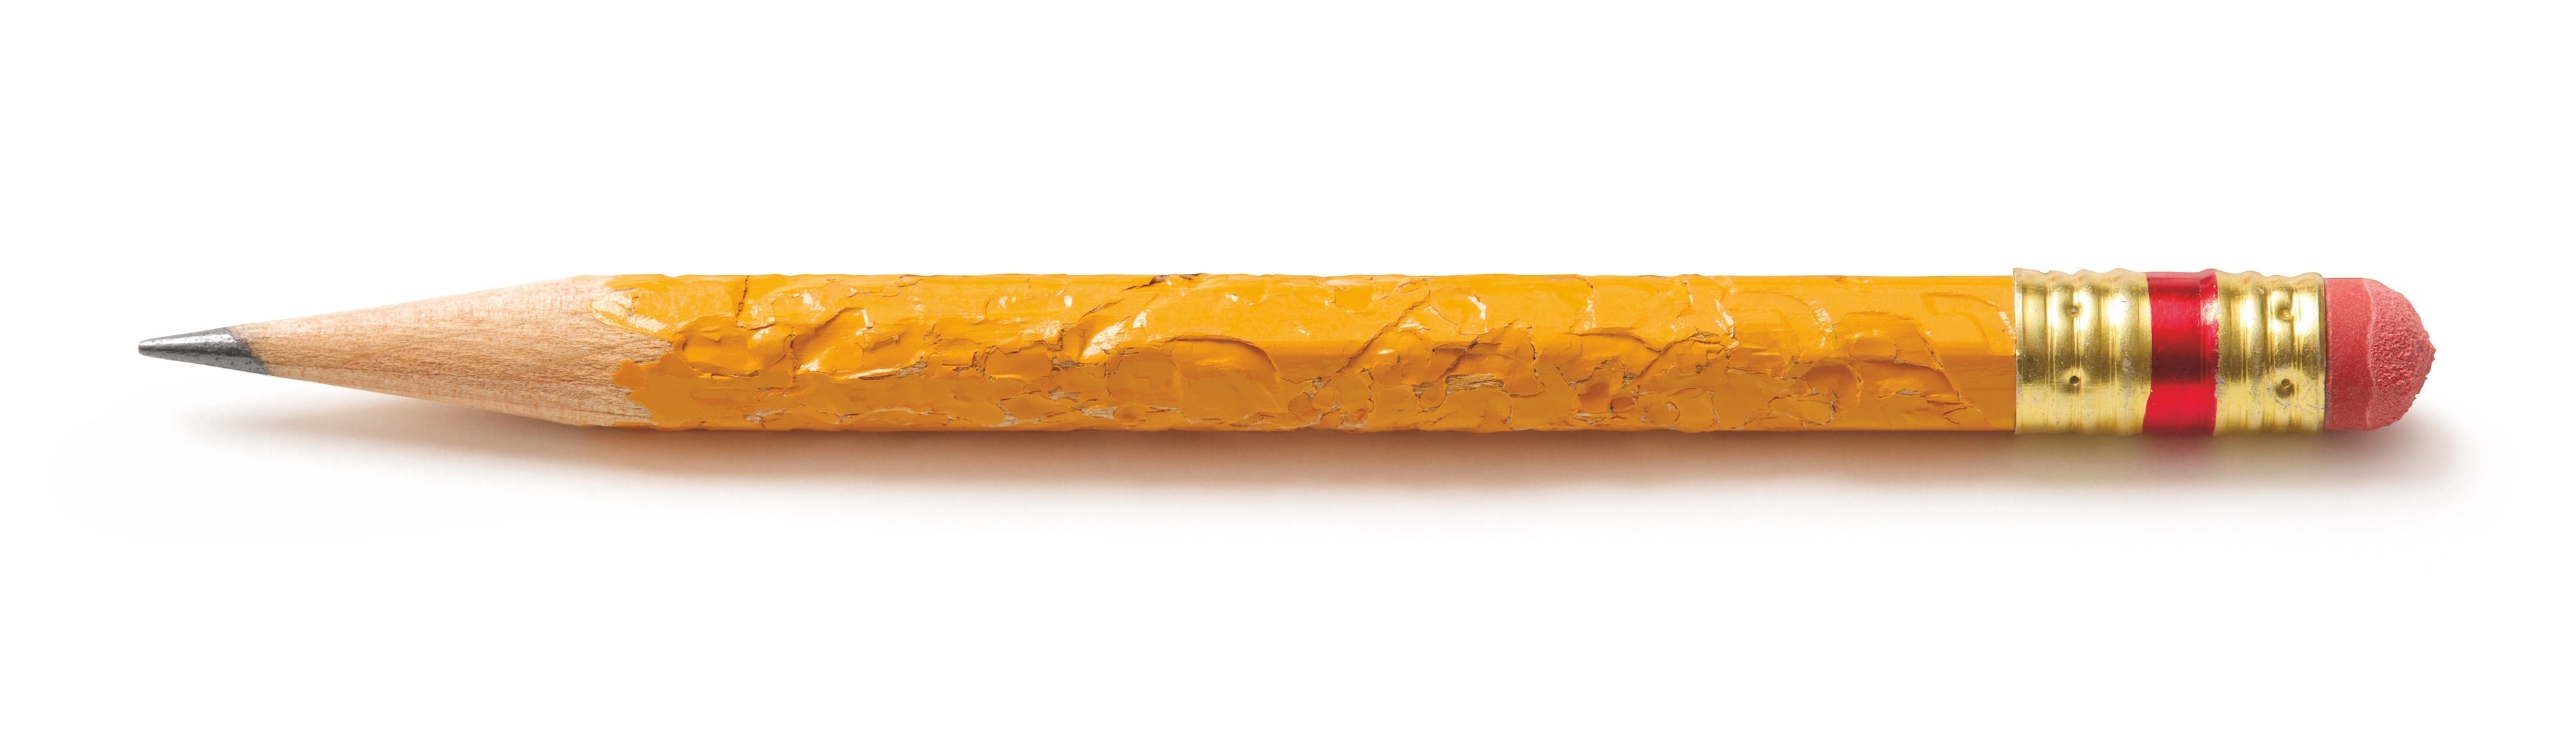 How a pencil beats the cycle industry